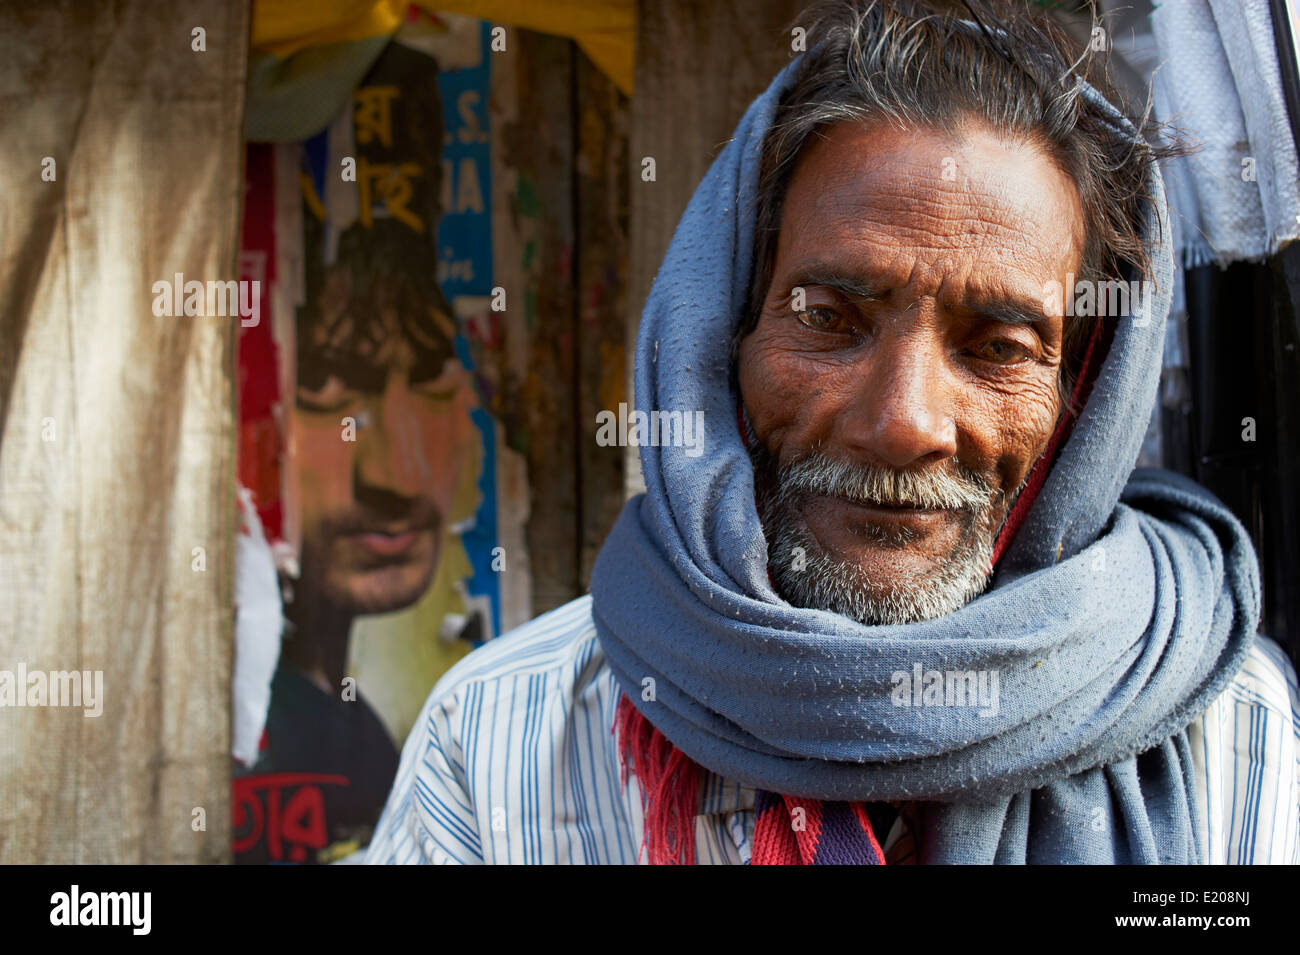 L'Inde, le Bengale occidental, Calcutta, Calcutta, rickshaw man on the street Banque D'Images